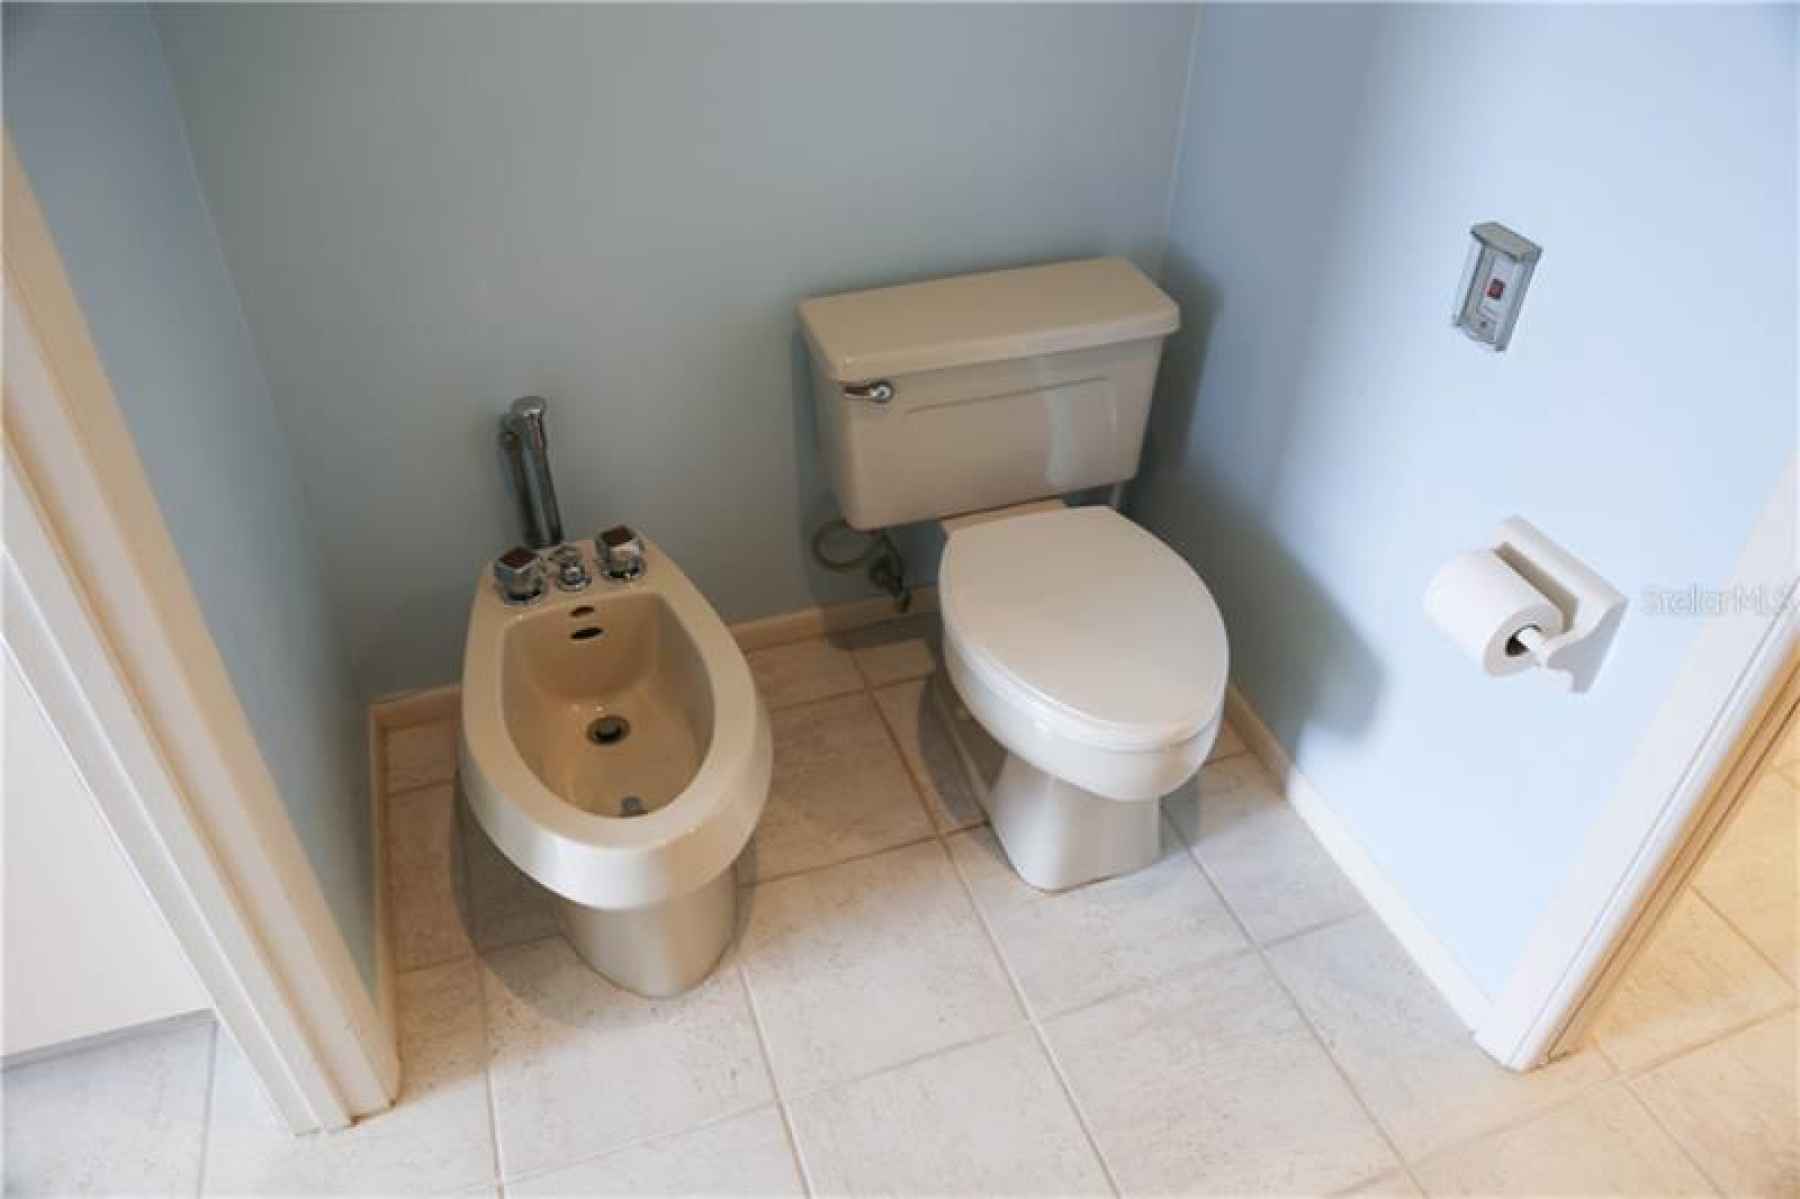 separate room with toilet, bidet, shower and bathtub